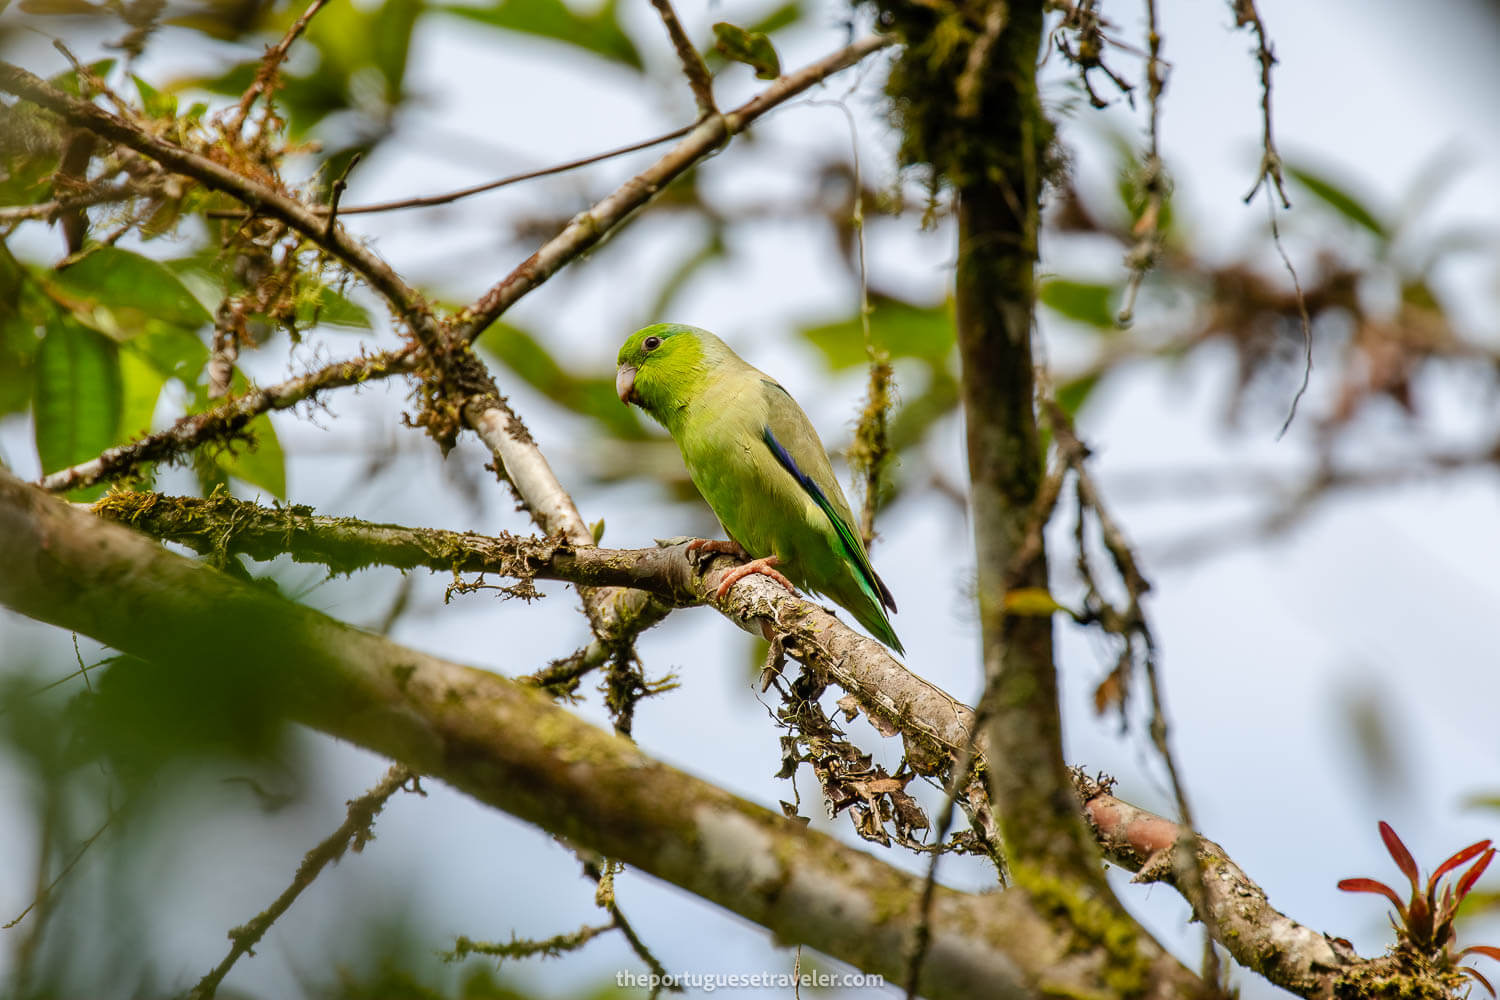 A Parrotlet on the Birdwatching Tour in Mindo